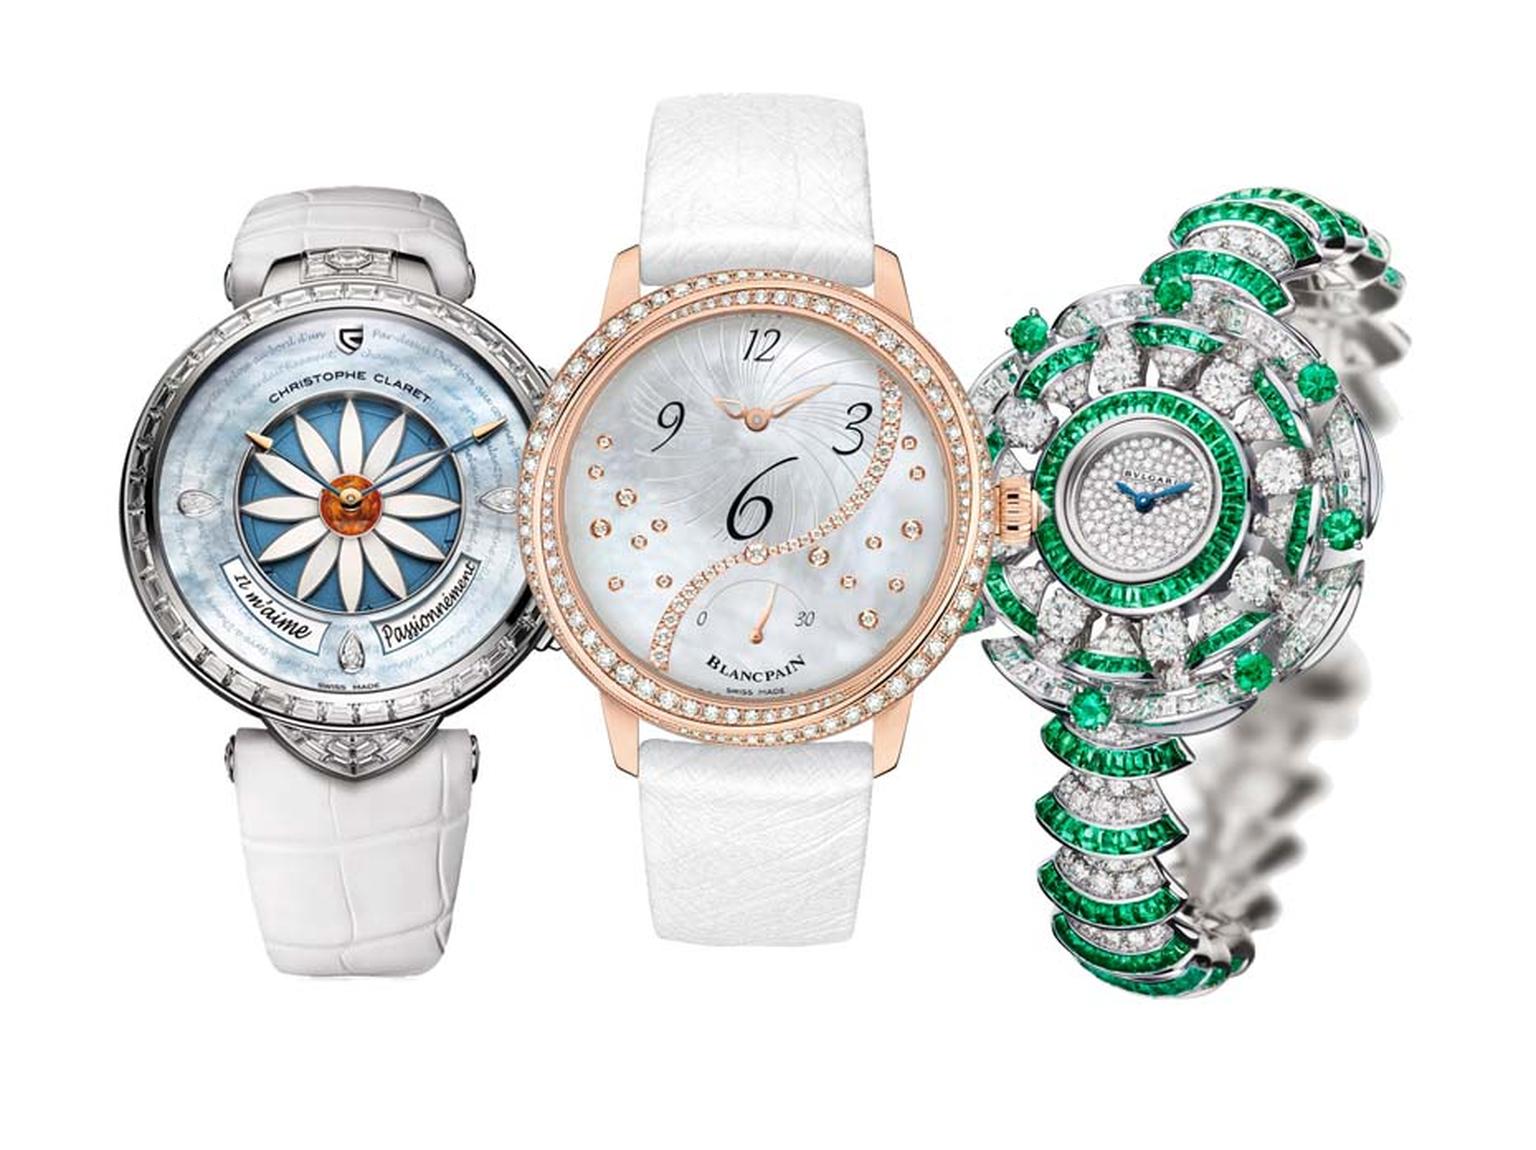 GPHG winners for women's watches included Christophe Claret’s whimsical Margot watch with its game of romantic roulette took home the Ladies’ High Mechanical prize, meanwhile Blancpain’s off-centred hour watch won the Ladies’ Watch prize and Bulgari’s opu